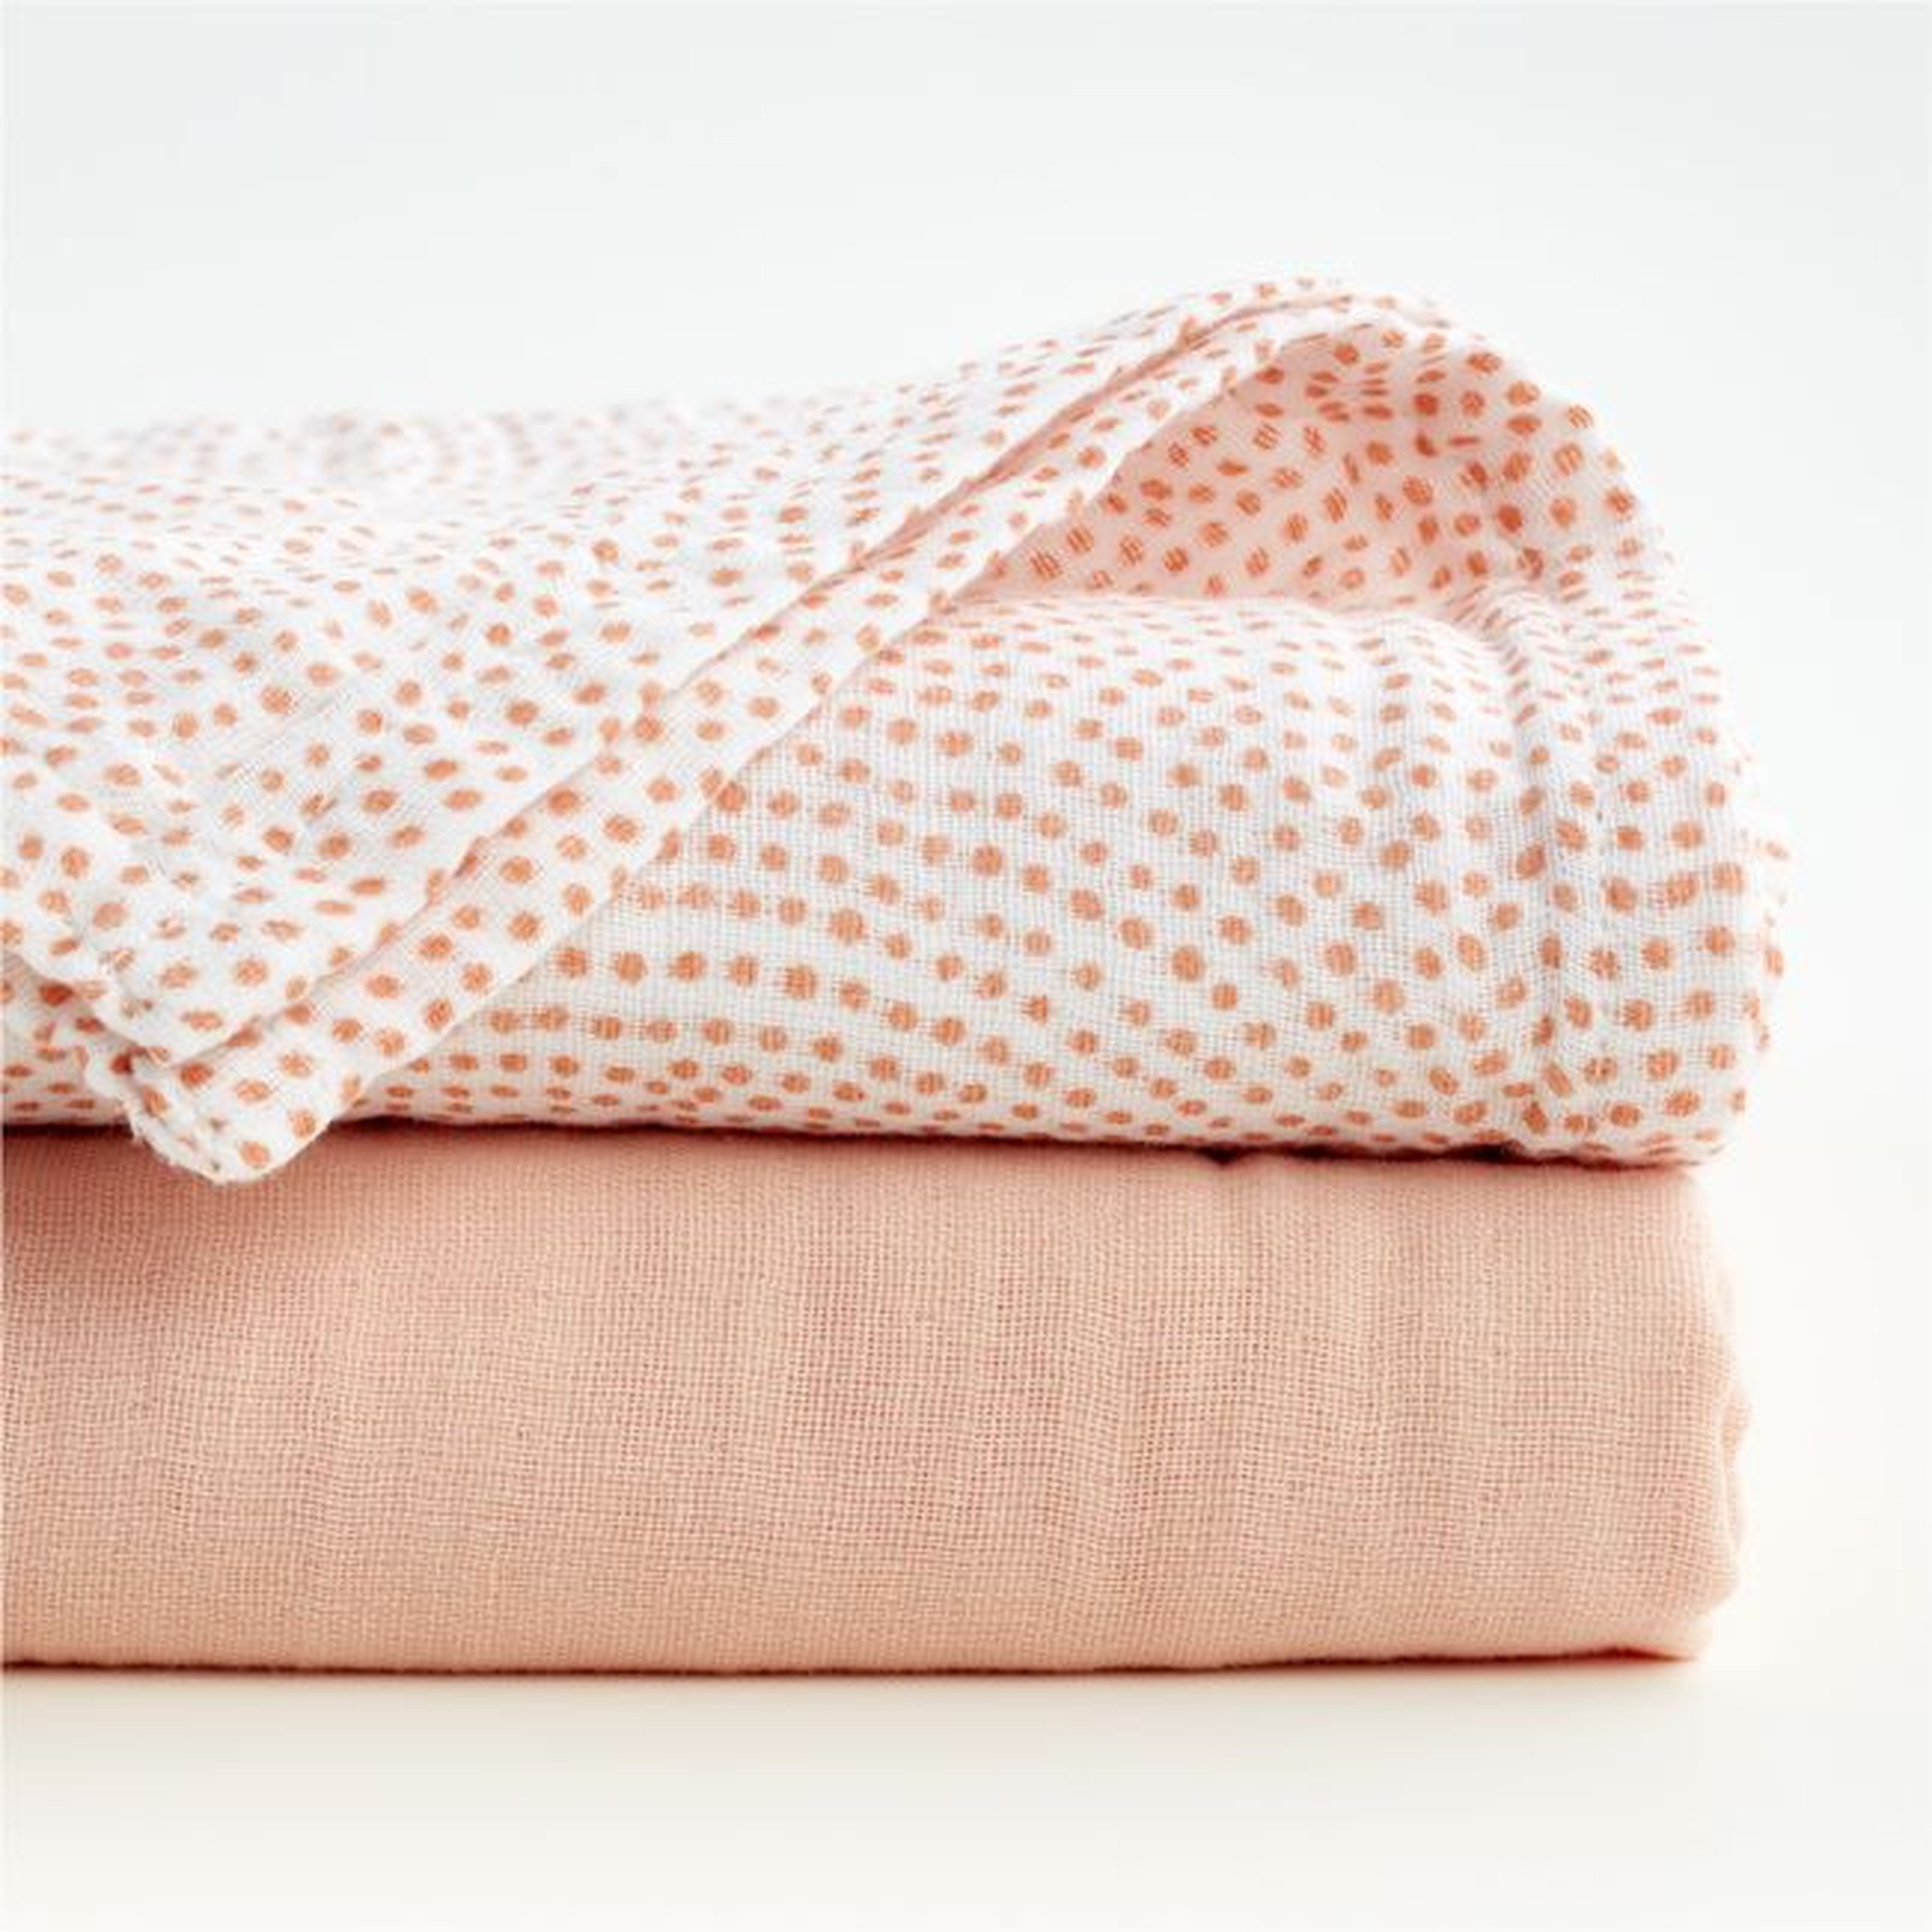 Lou Lou Clay Organic Baby Swaddles by Leanne Ford, Set of 2 - Crate and Barrel